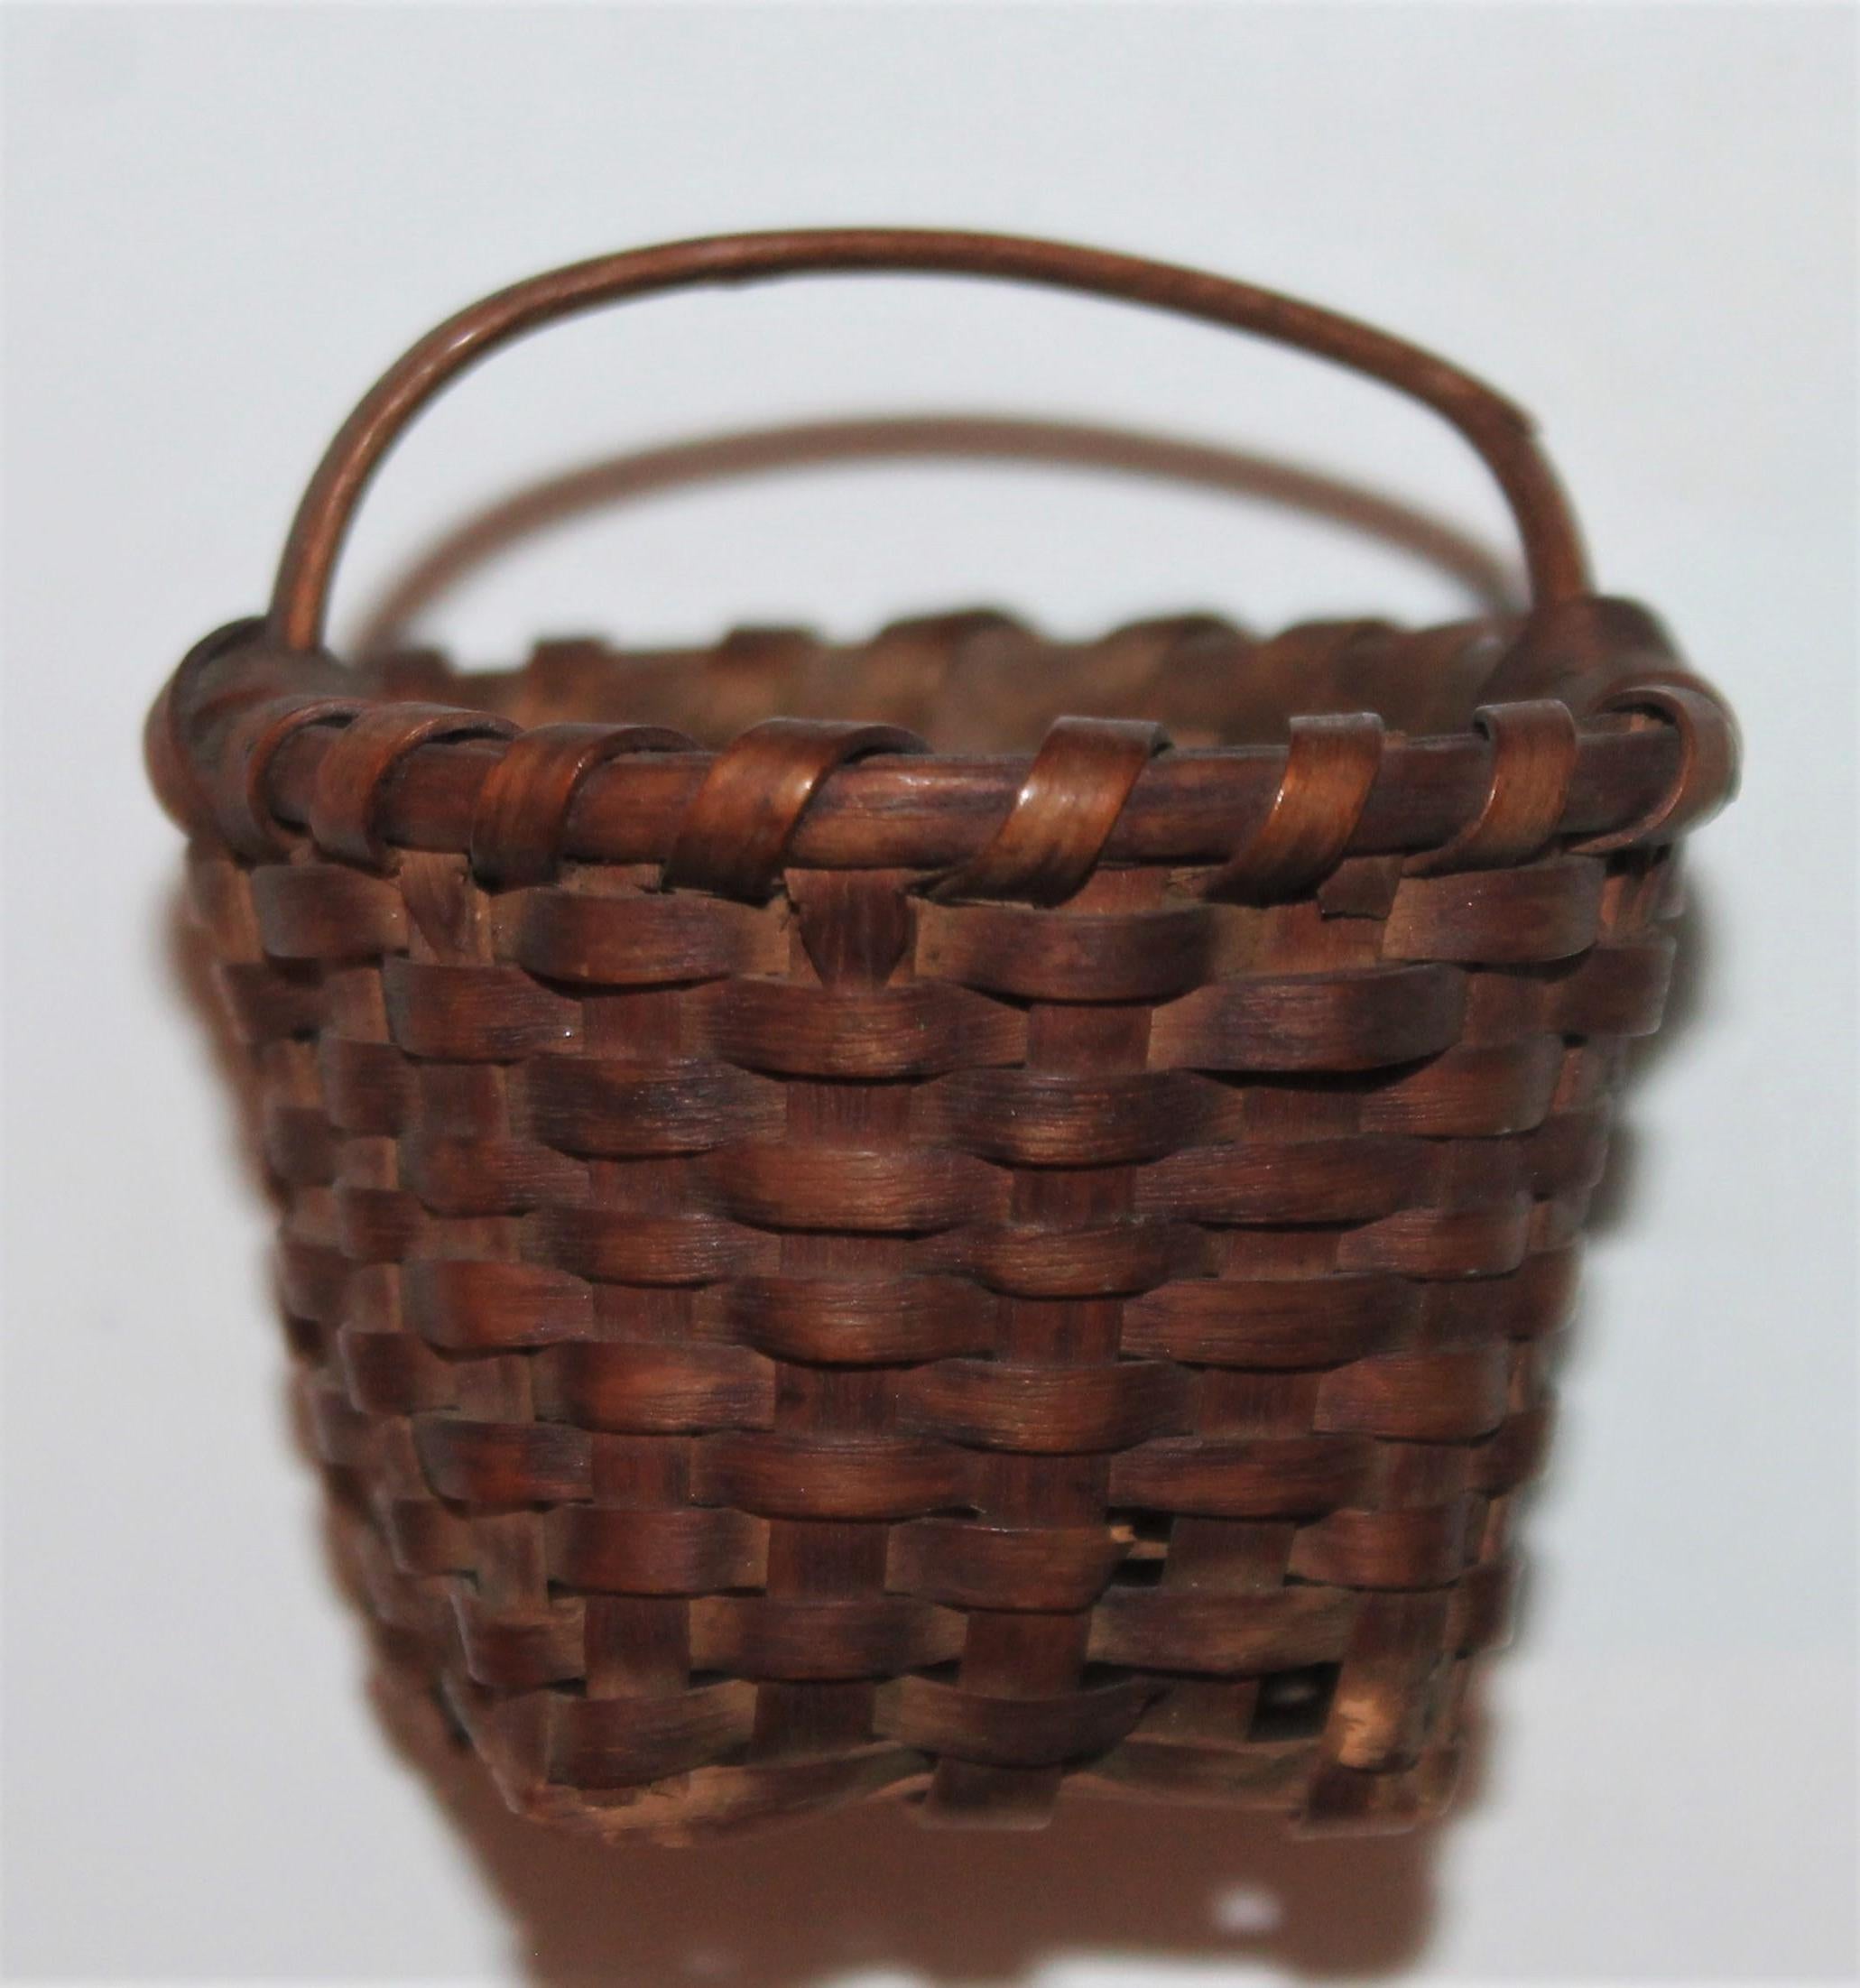 This fine 19th century old surface tiny basket is in amazing as found condition. The scale is unbelievable.